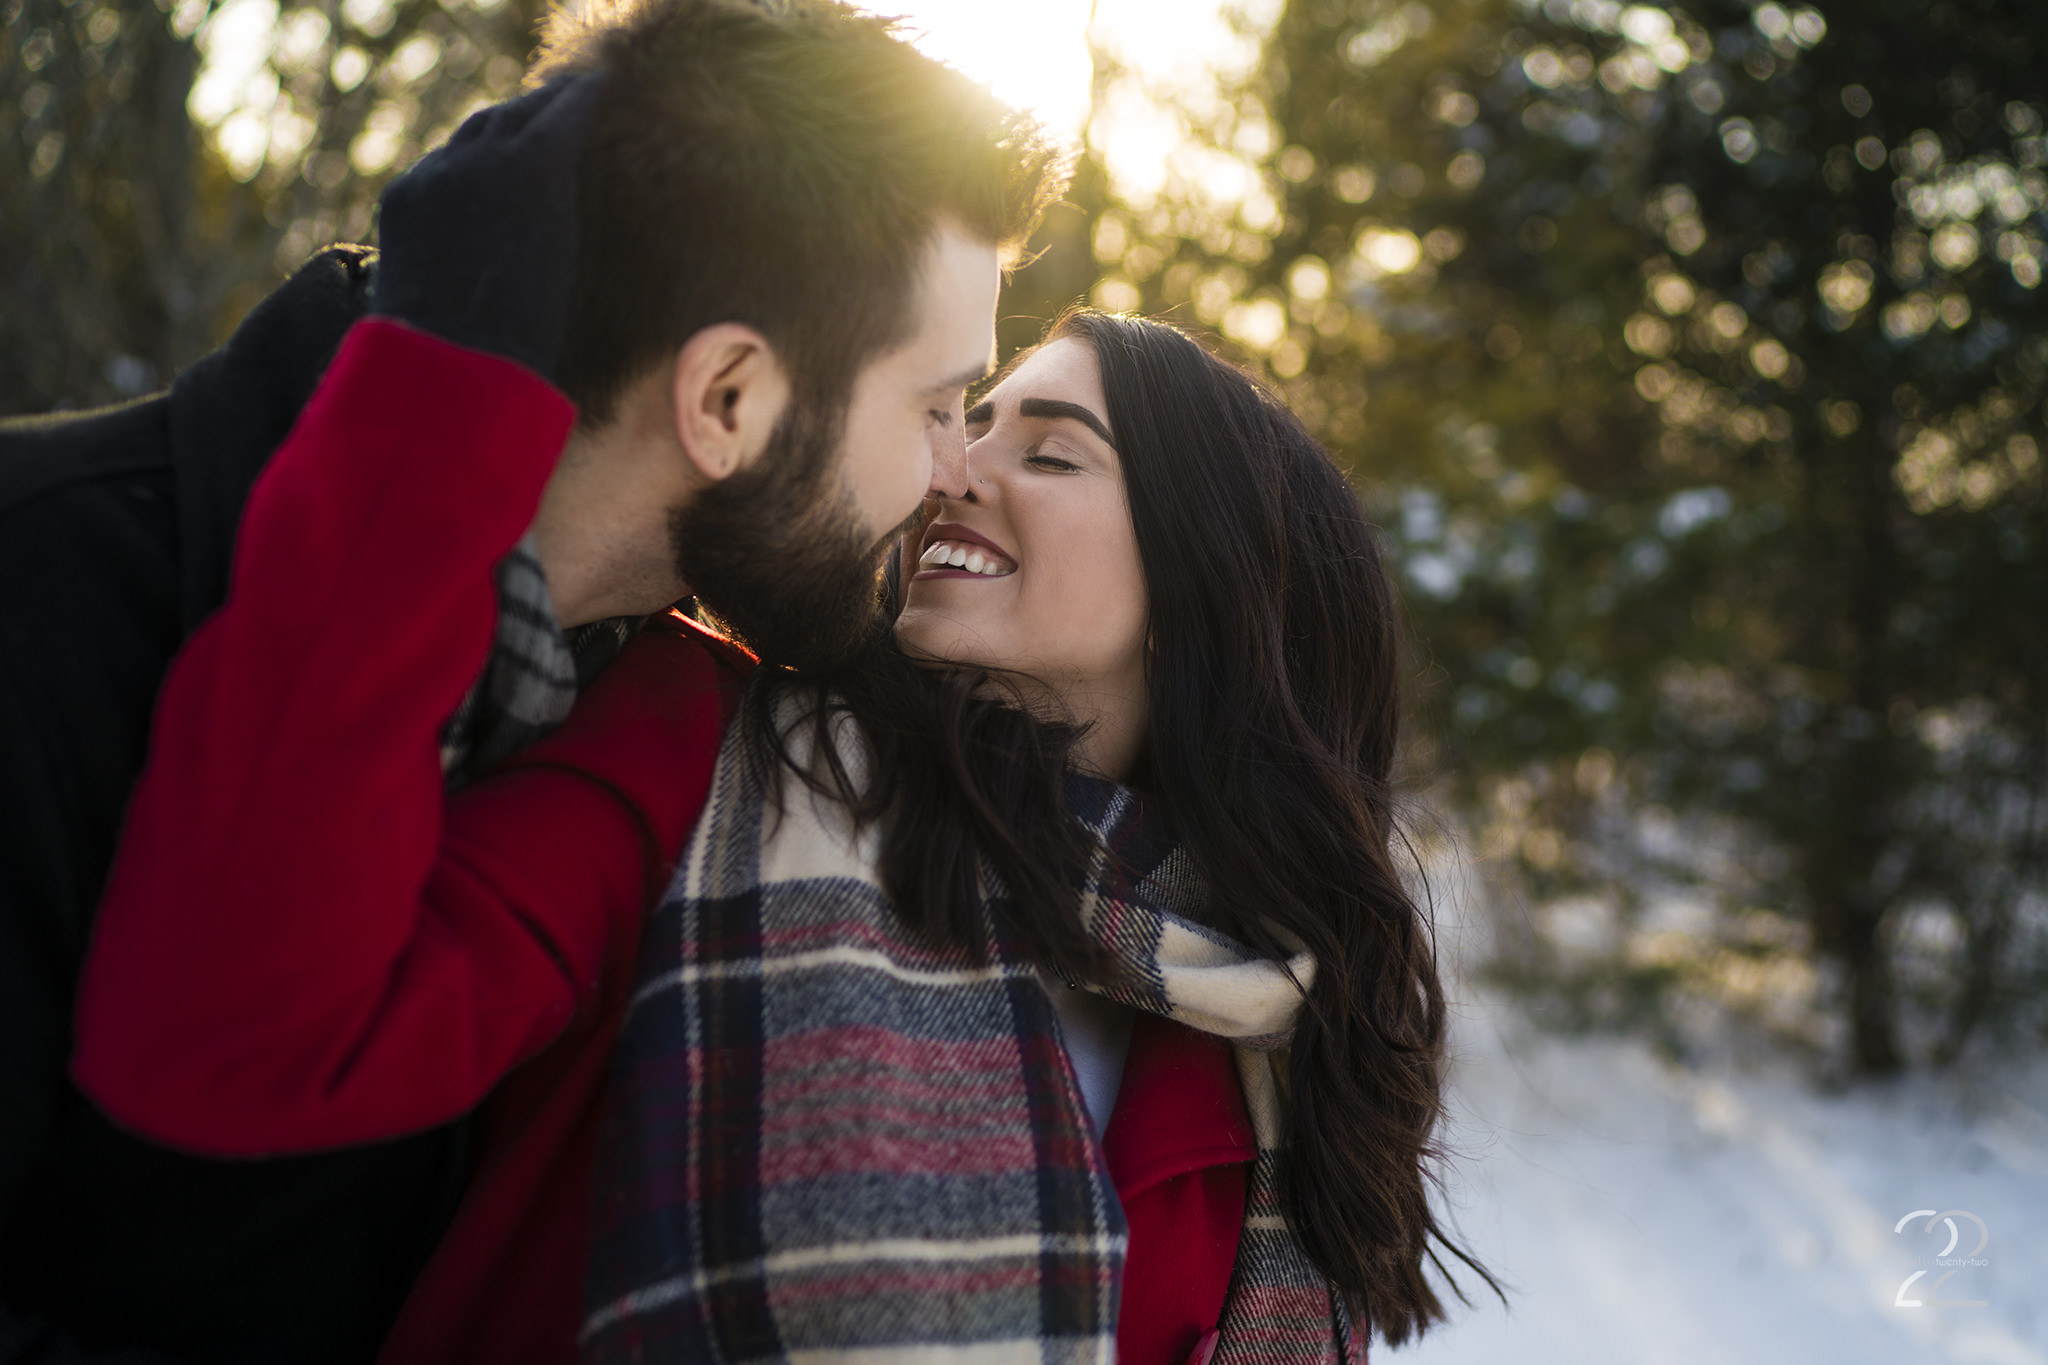 Woman pulls a man in for a kiss, both smiling, in the snow at sunset at Oakes Quarry Park by Dayton Wedding Photographer Studio 22 Photography